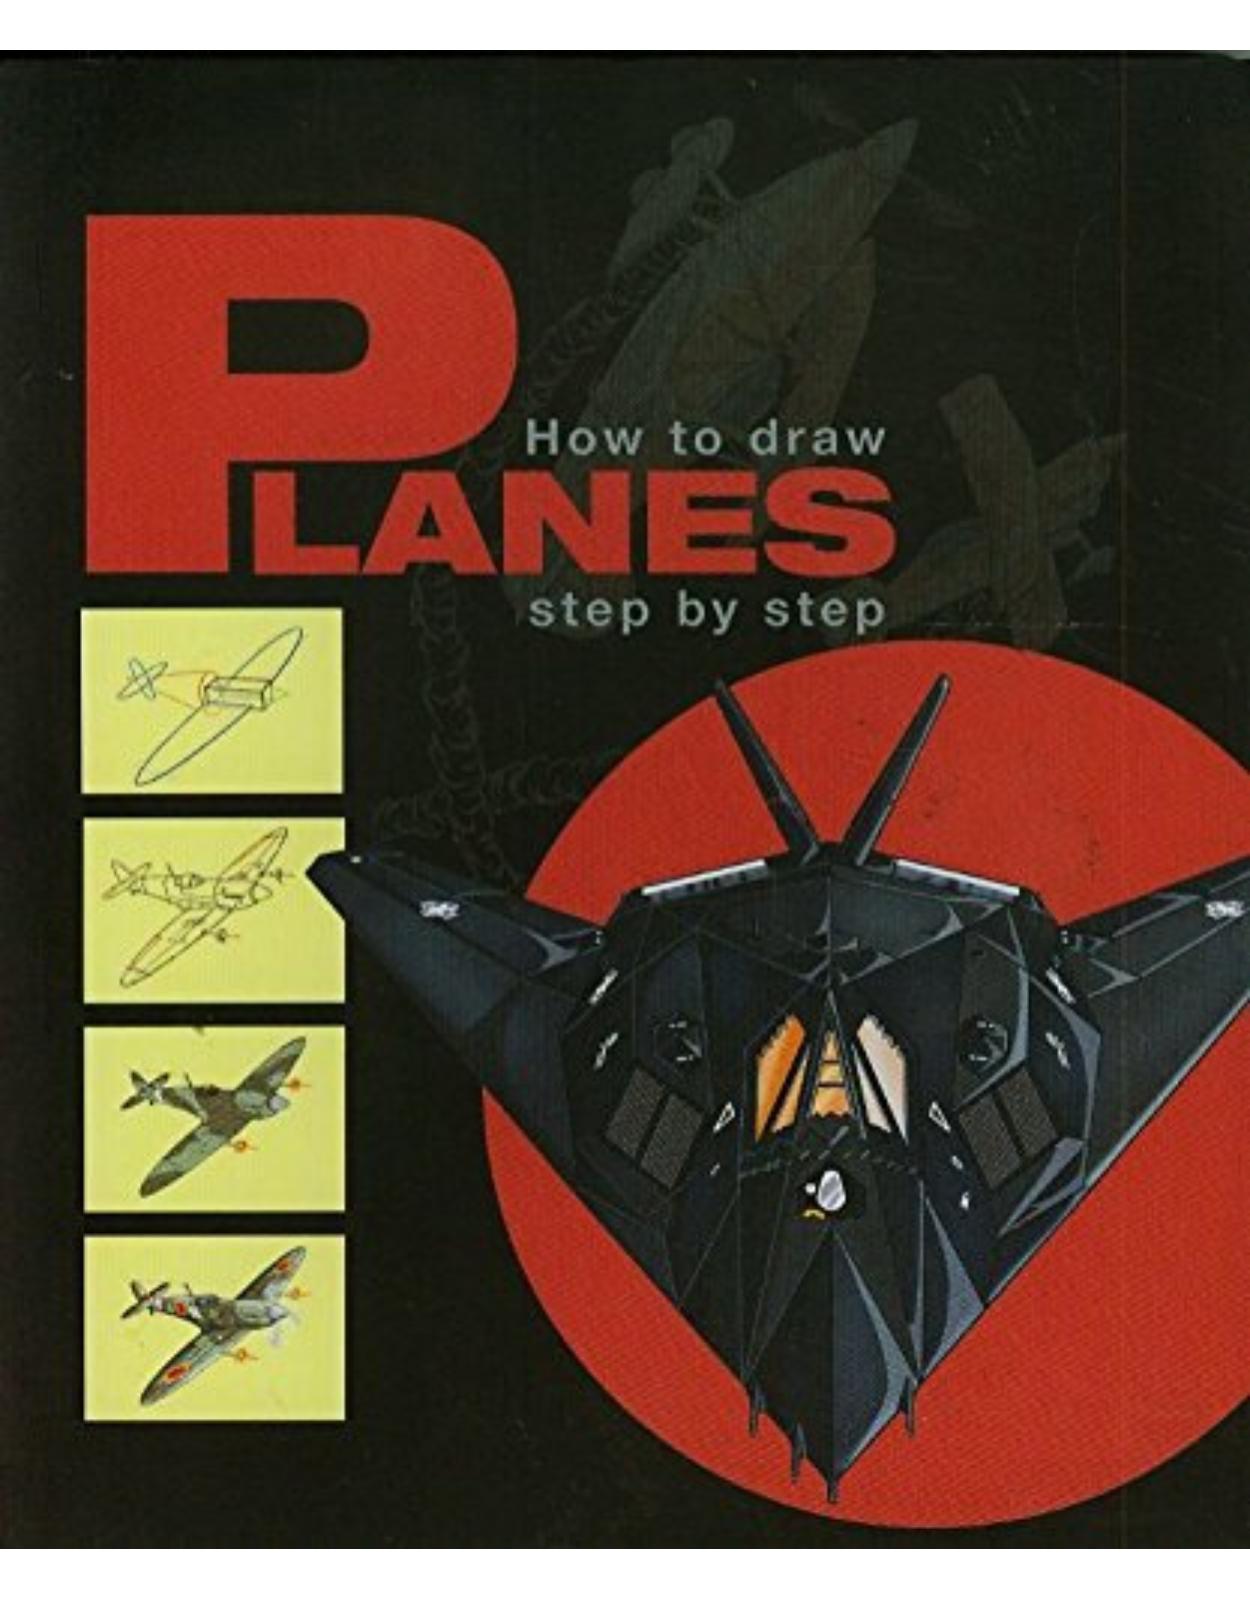 How to draw - Planes 